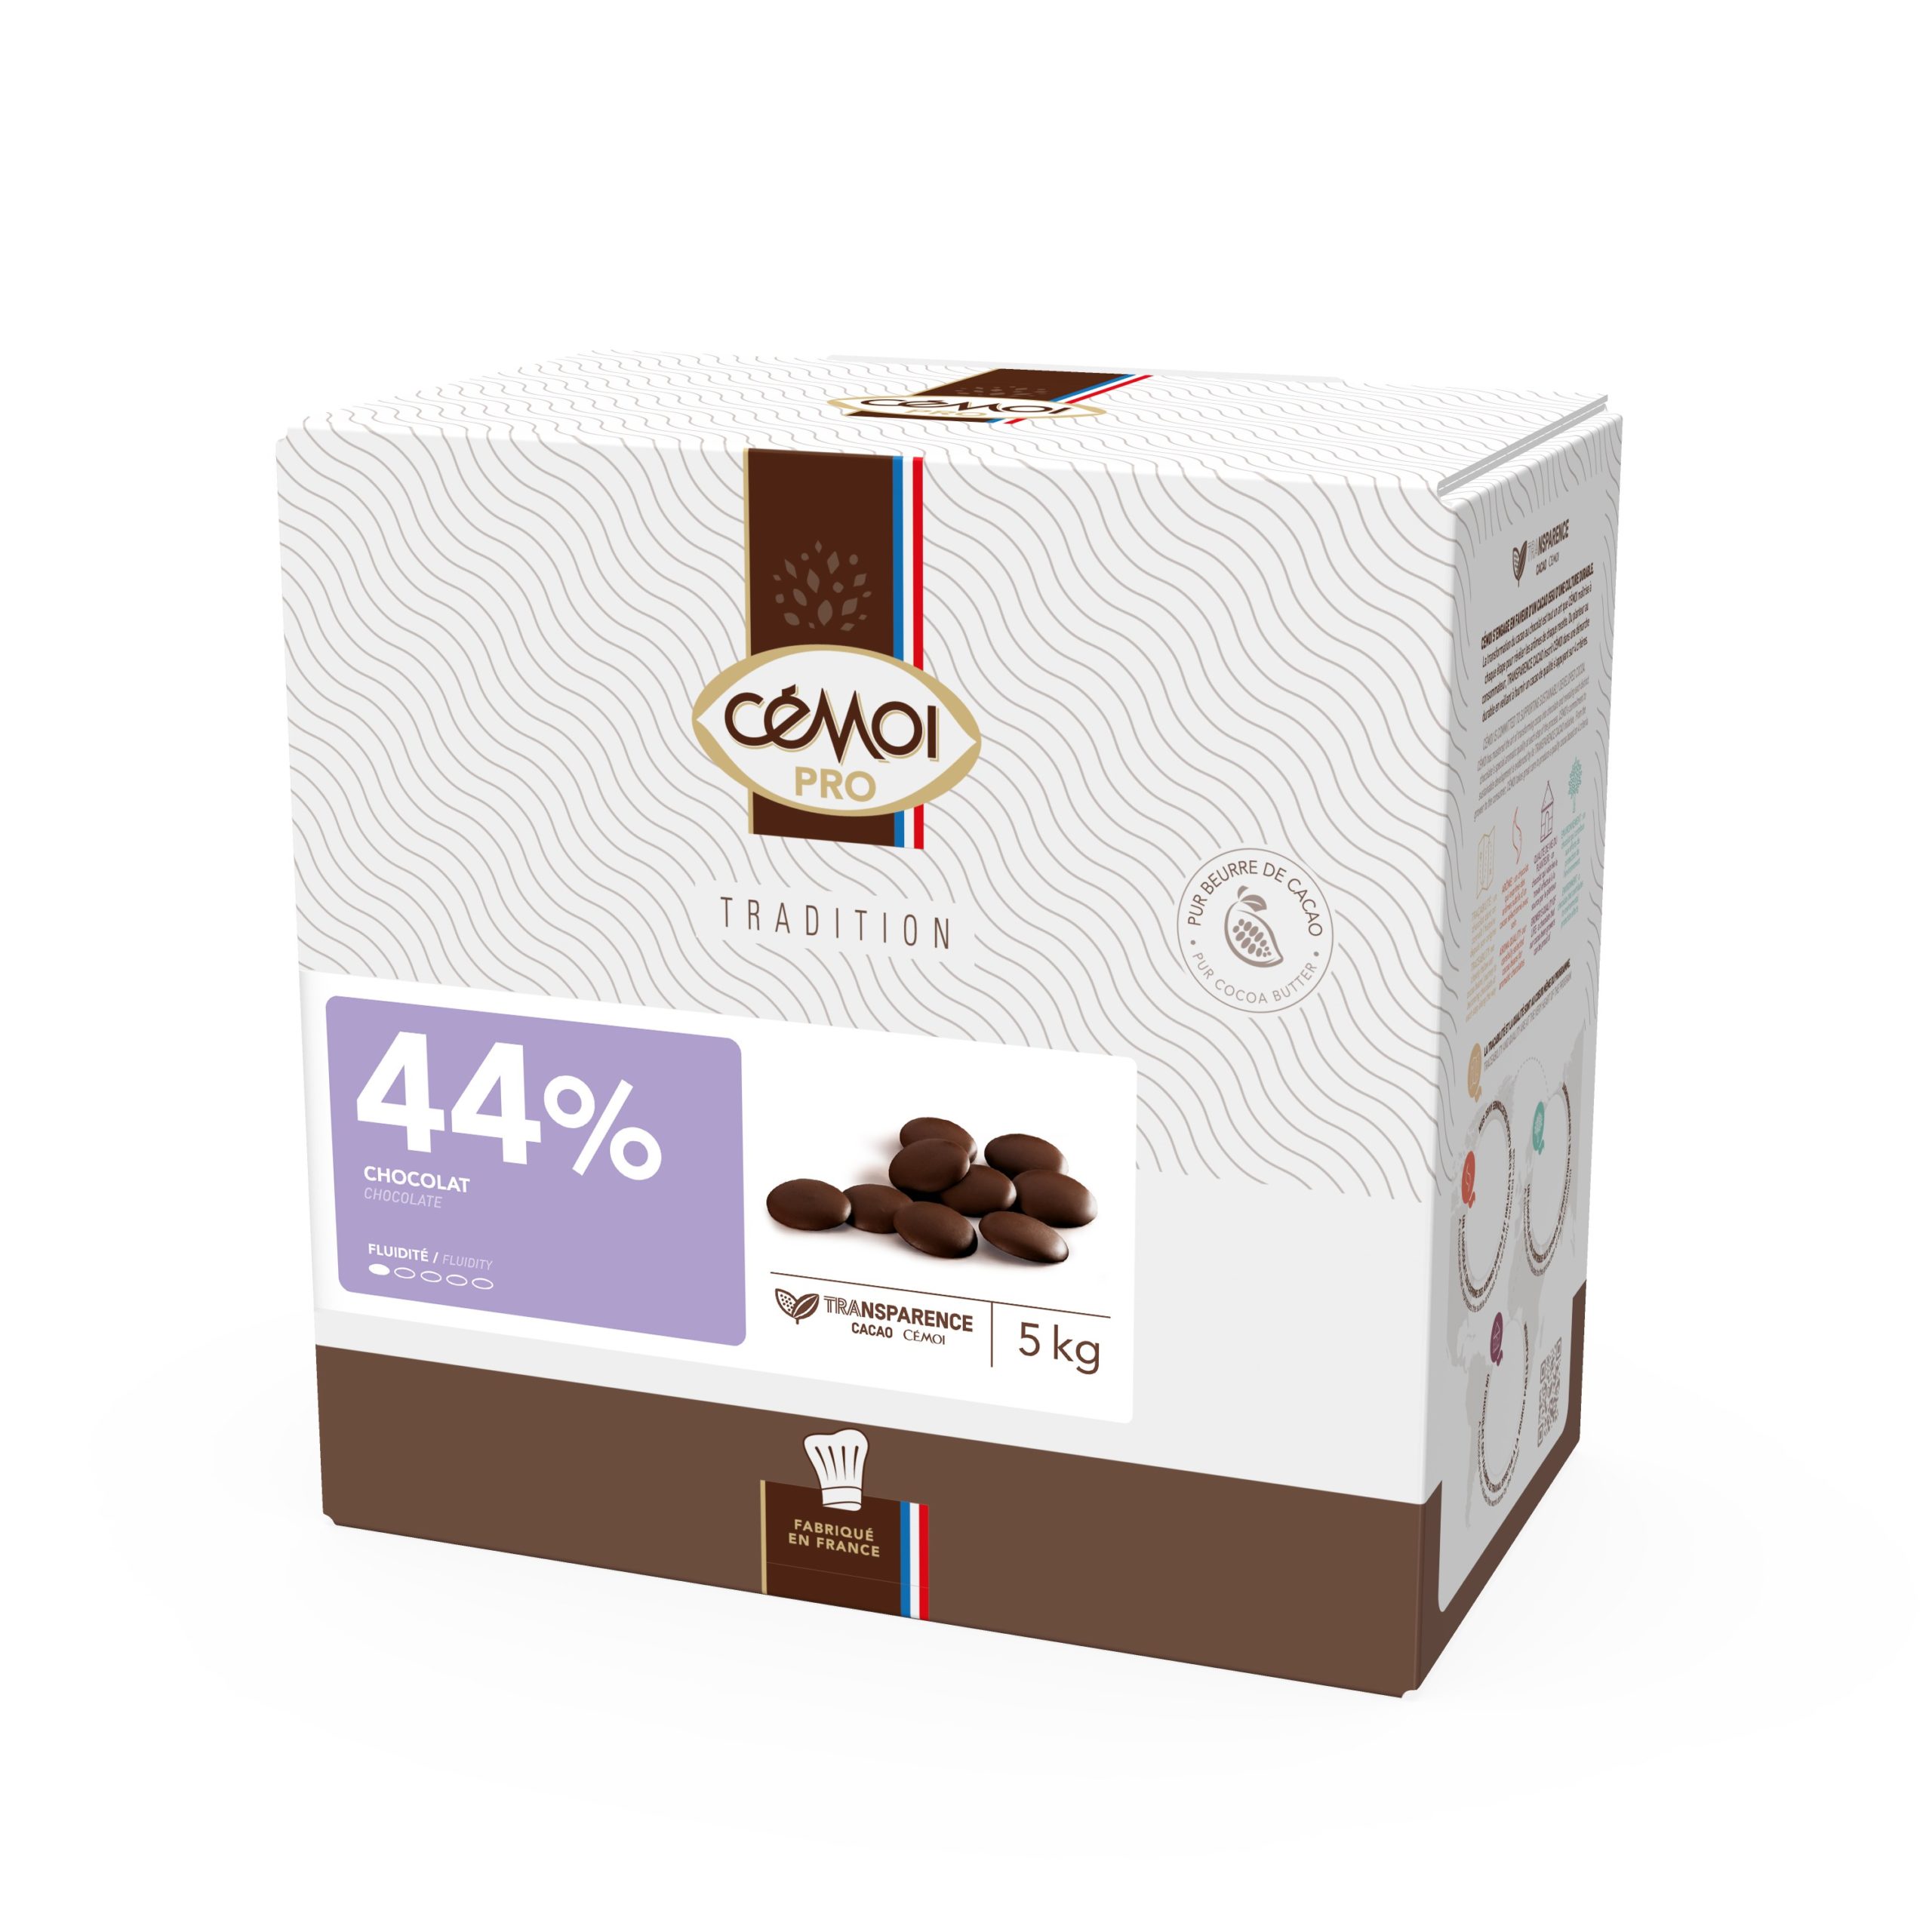 Chocolat Tradition 44% Cacao